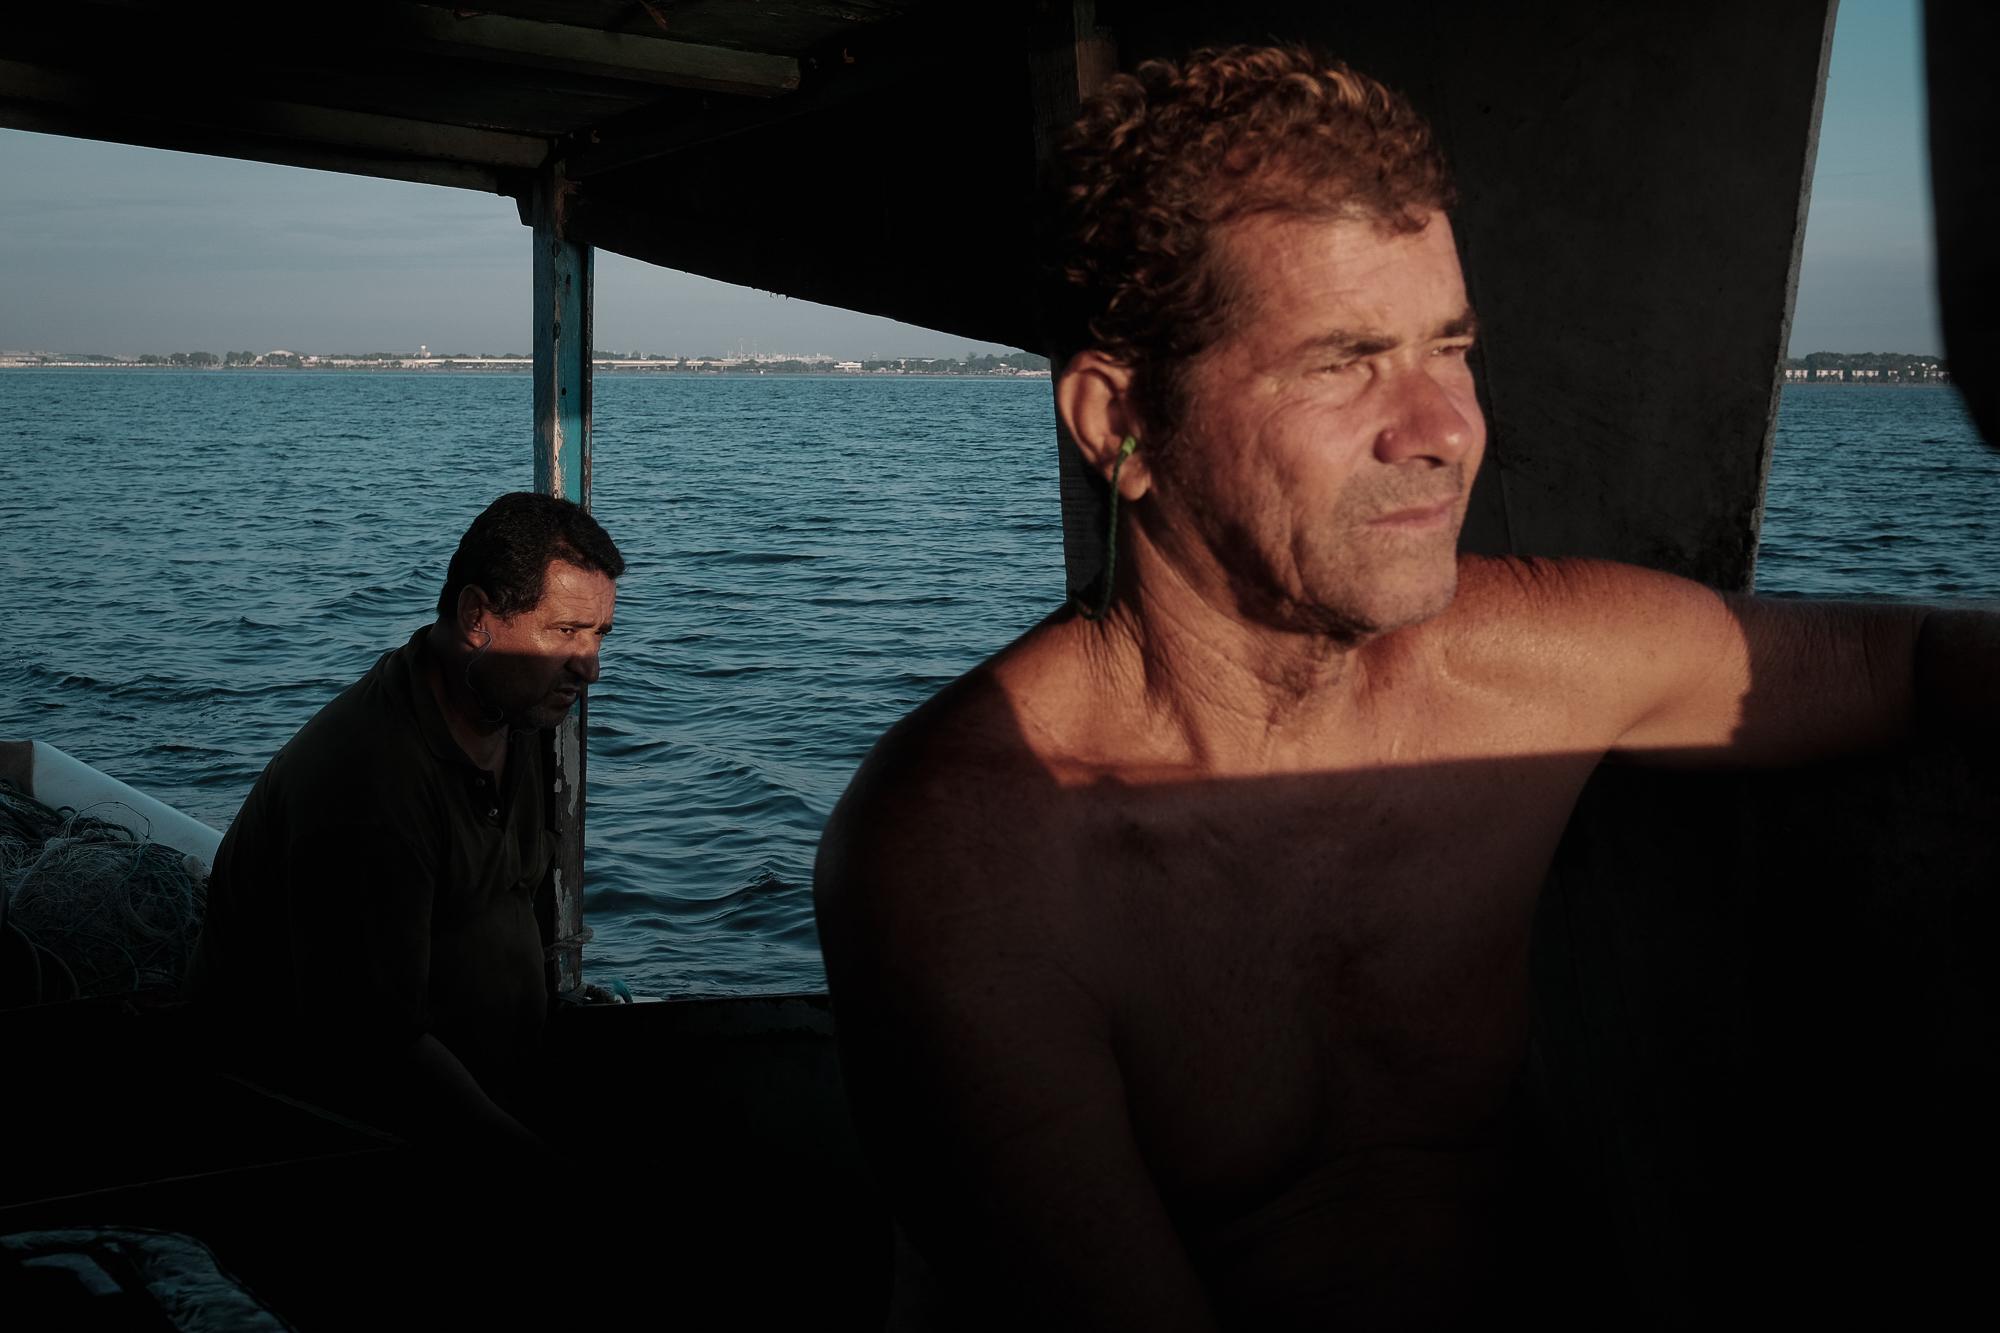 David (l) and Josu&eacute; (r), two artesanal fishermen from Z-11 head out at dawn to try...